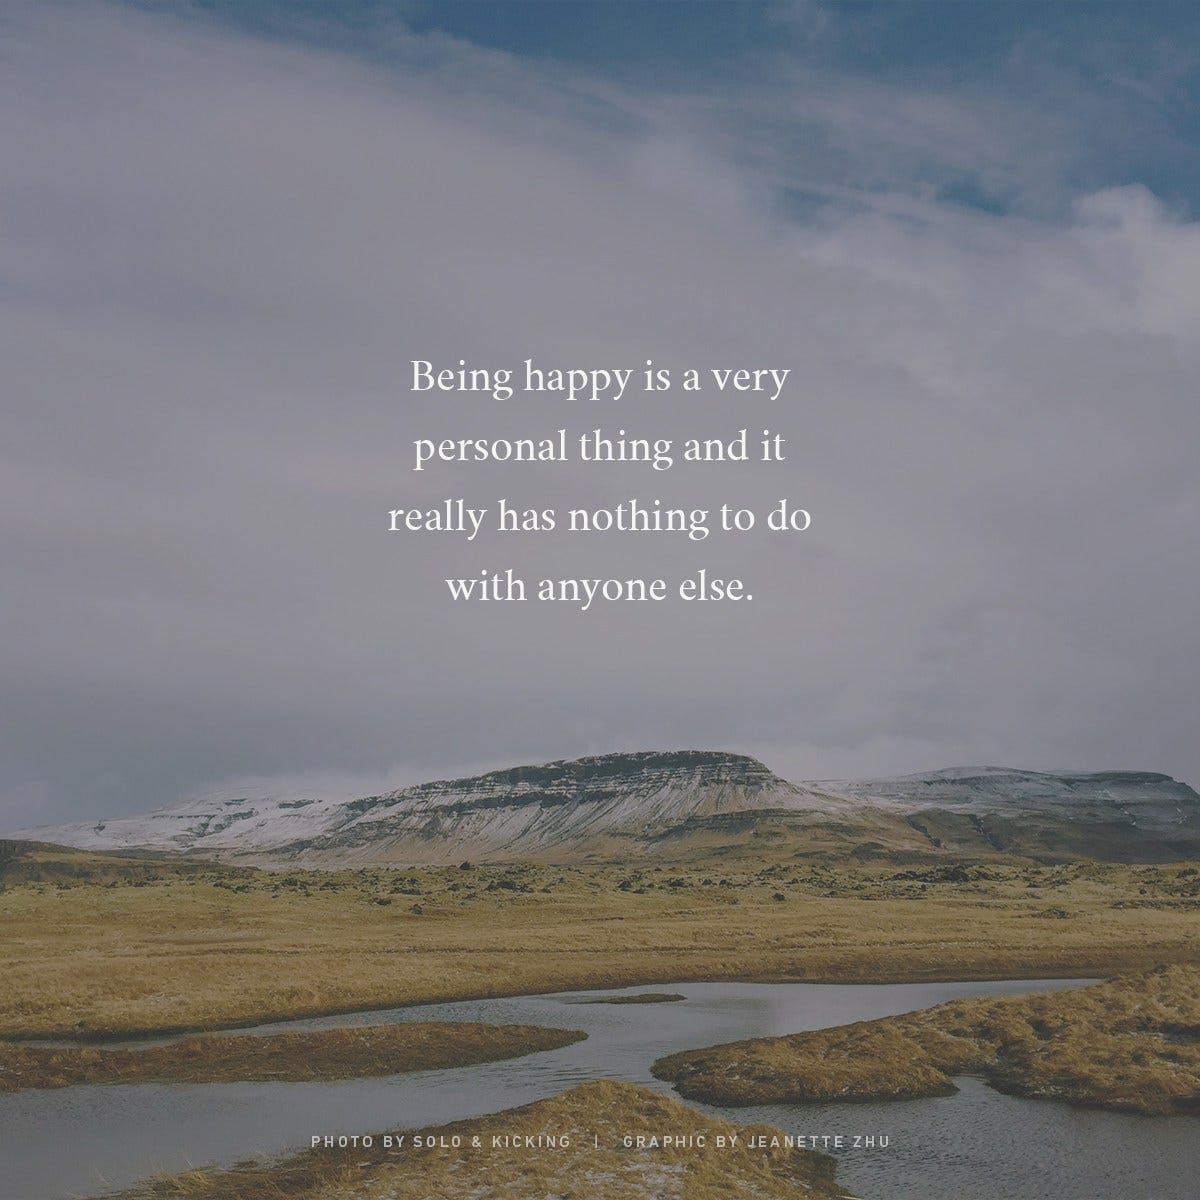 11 Best Alone But Happy Quotes. Do you want to learn to be alone ...